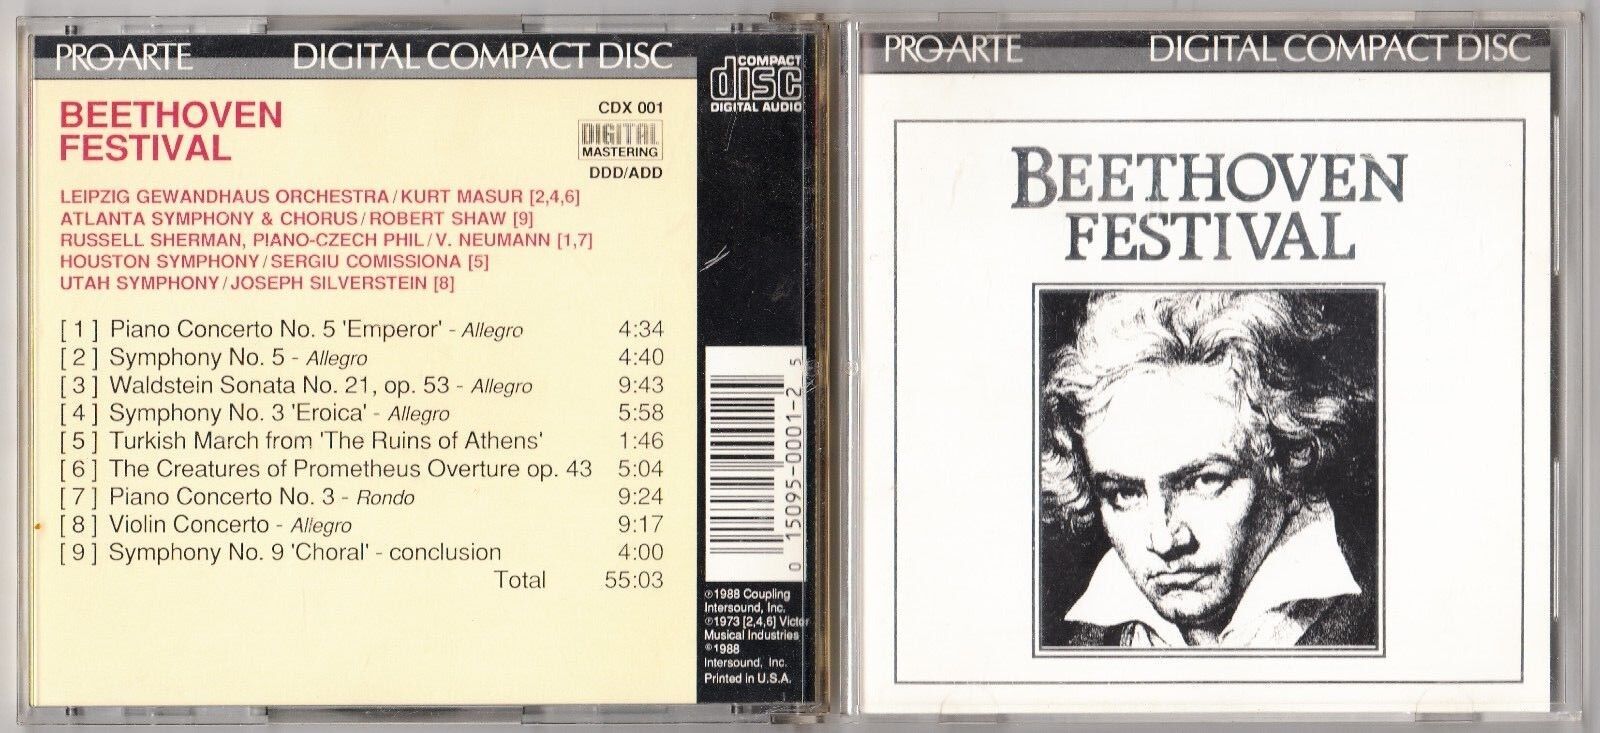 Beethoven Festival - PRO ARTE CD 1988 INTERSOUND USA CDX 001 EARLY PRESS 